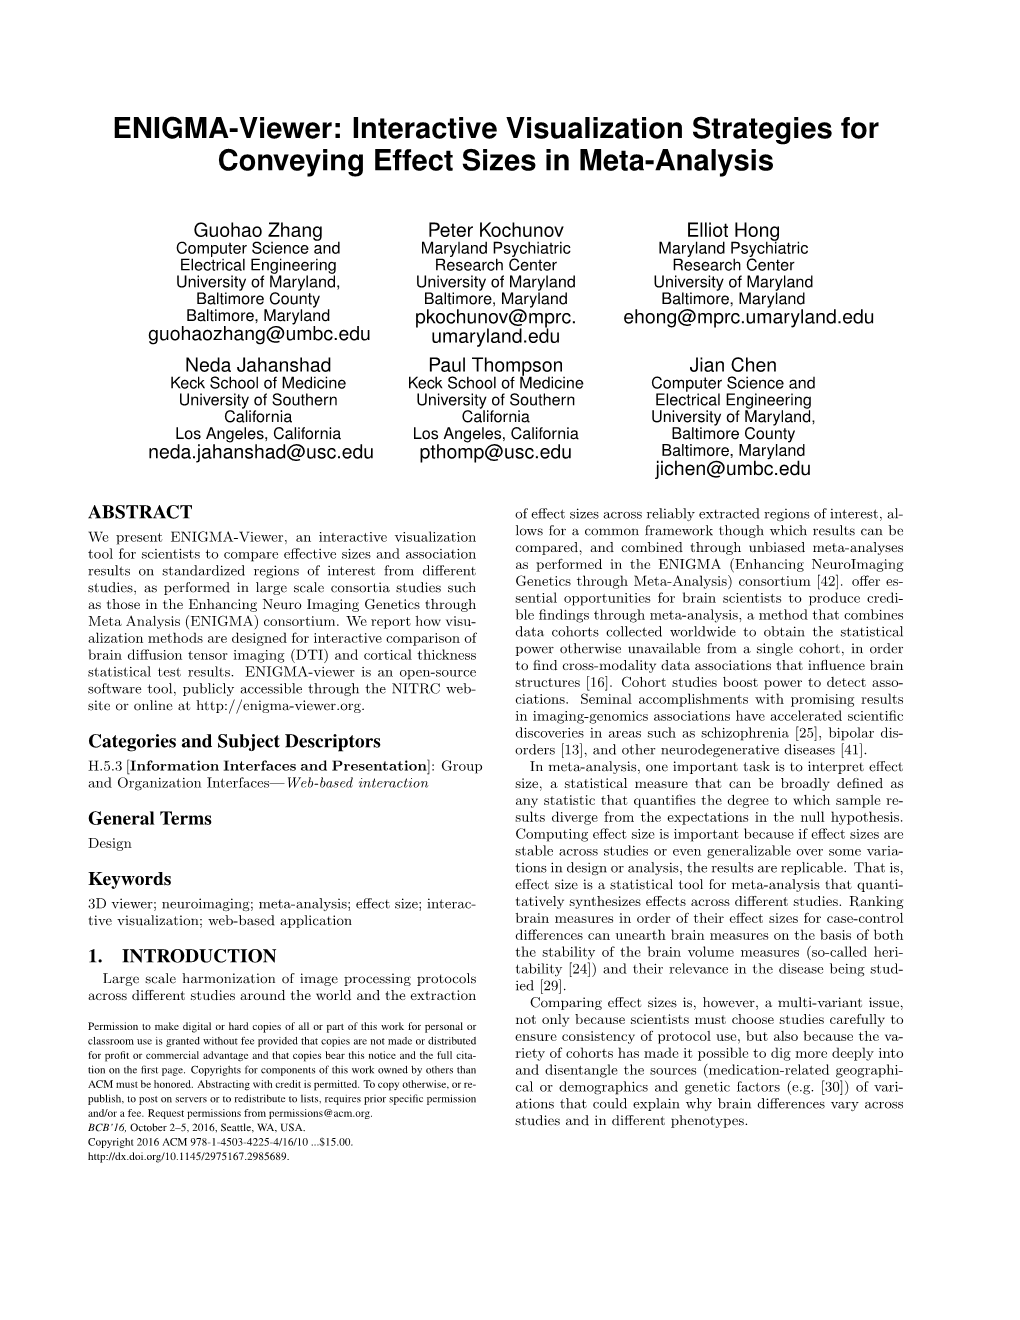 ENIGMA-Viewer: Interactive Visualization Strategies for Conveying Effect Sizes in Meta-Analysis